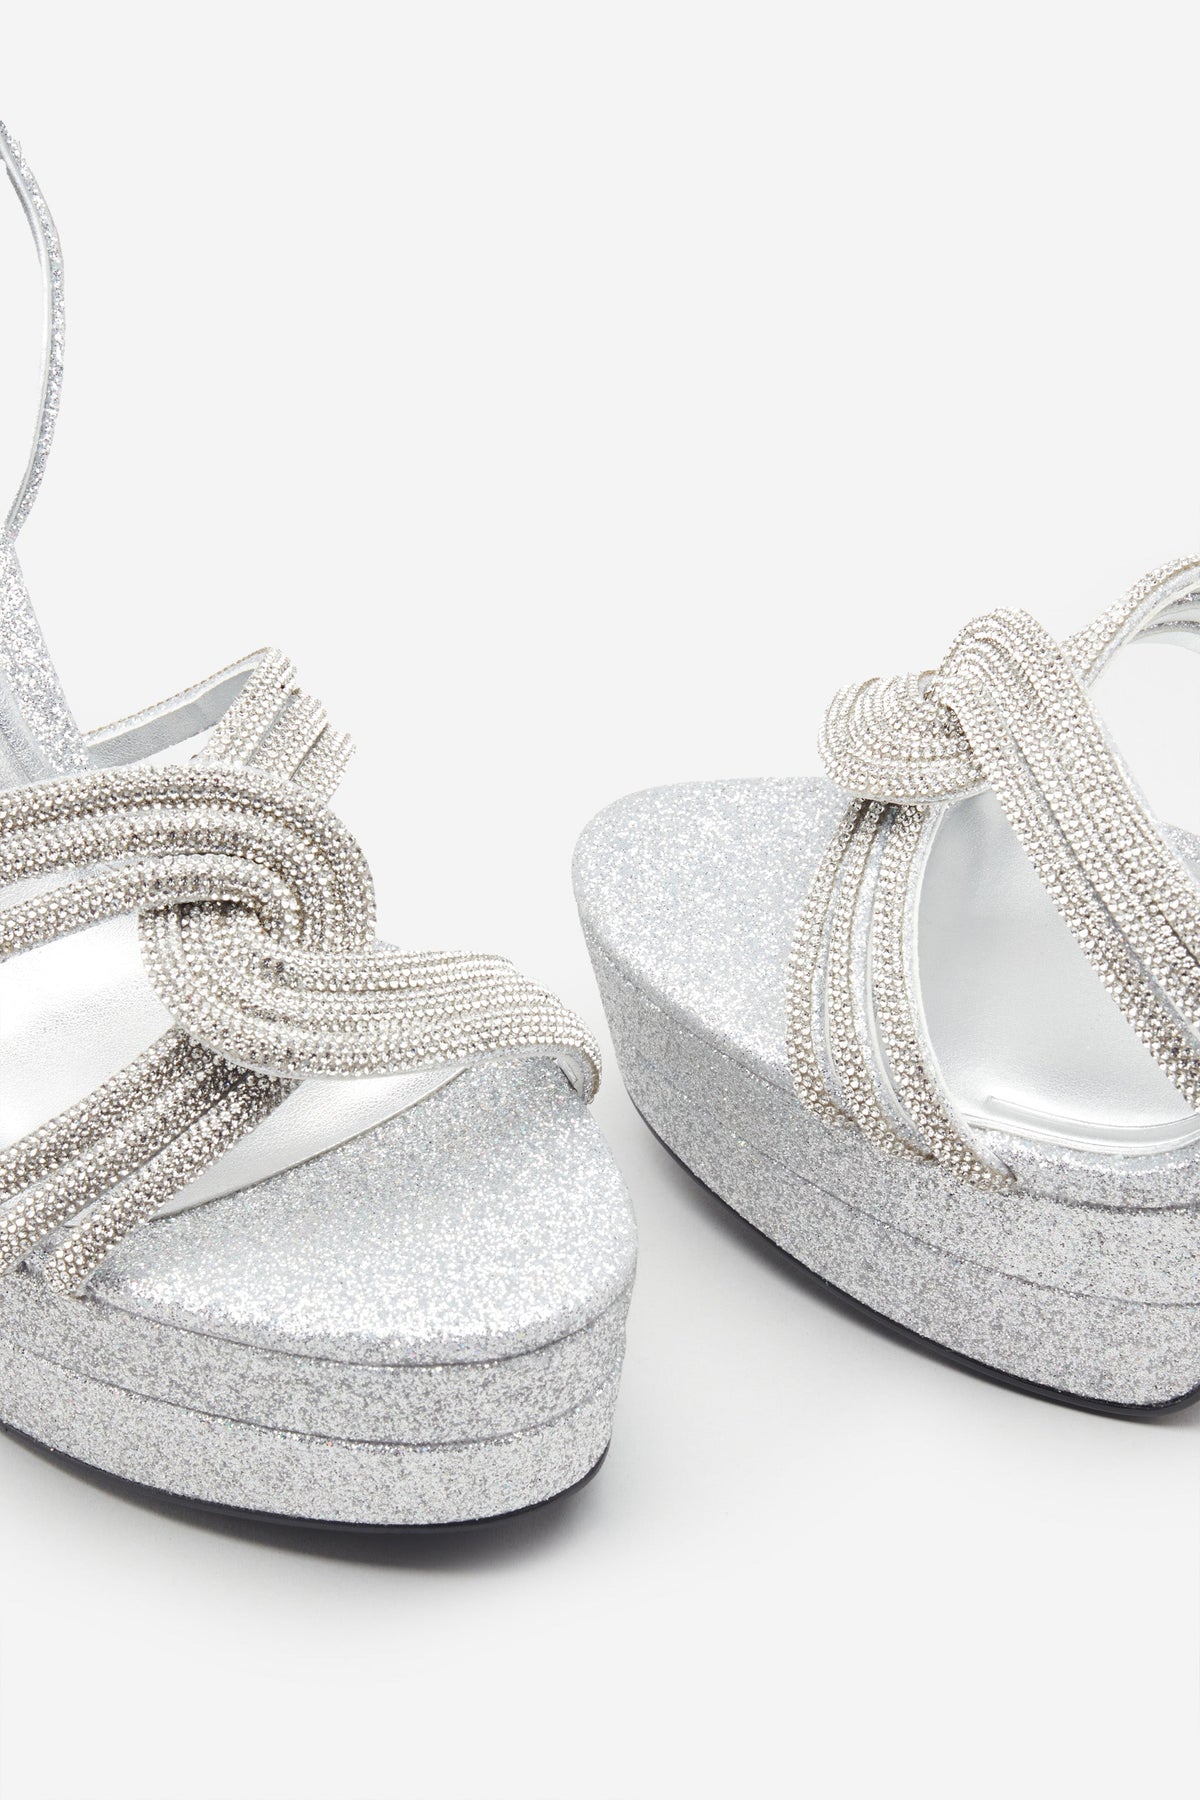 Mitter Silver Multi Sandals by Mollini | Shop Online at Mollini